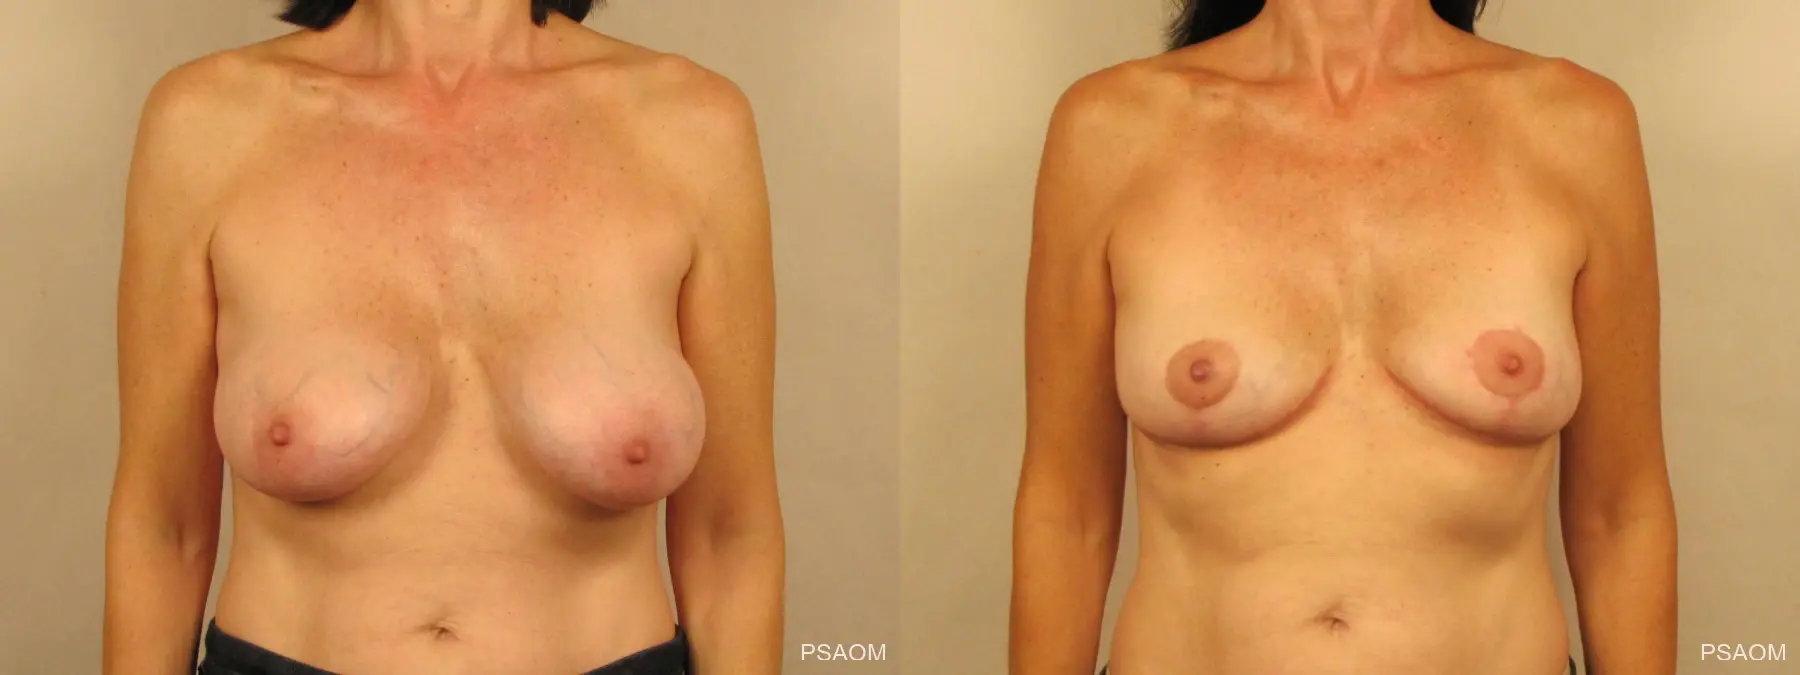 Breast Implant Removal With Lift: Patient 1 - Before and After  